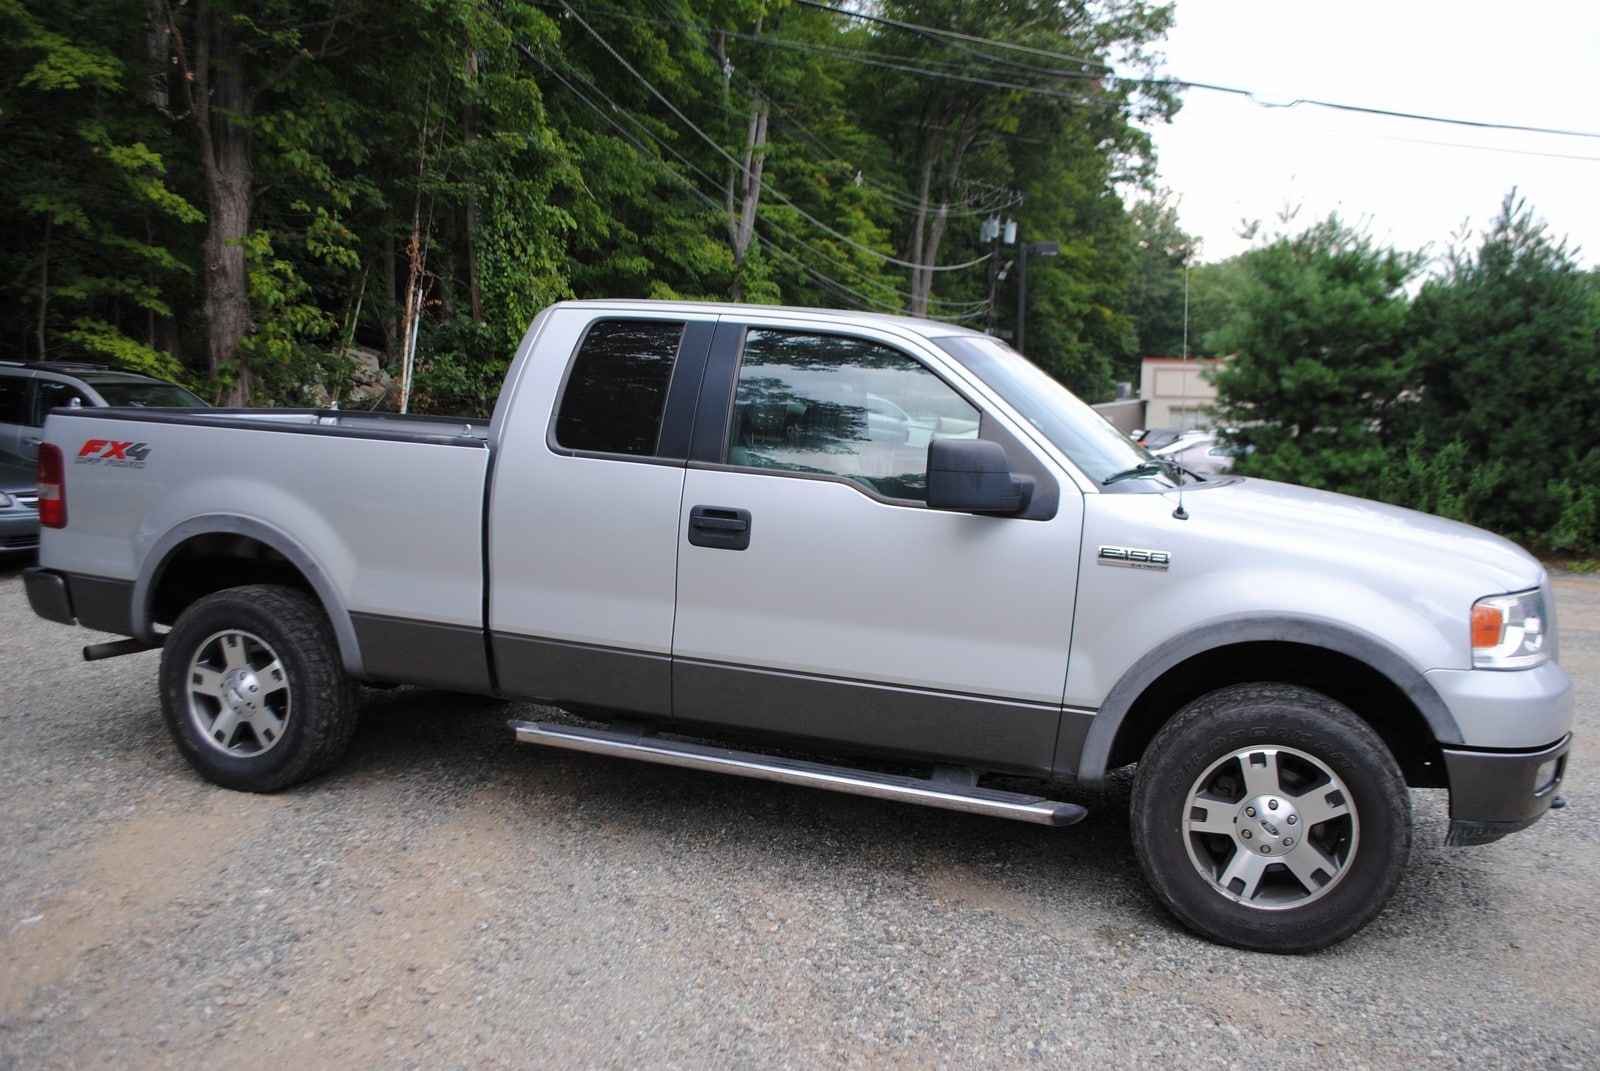 Used 2005 Ford F-150 For Sale | West Milford NJ